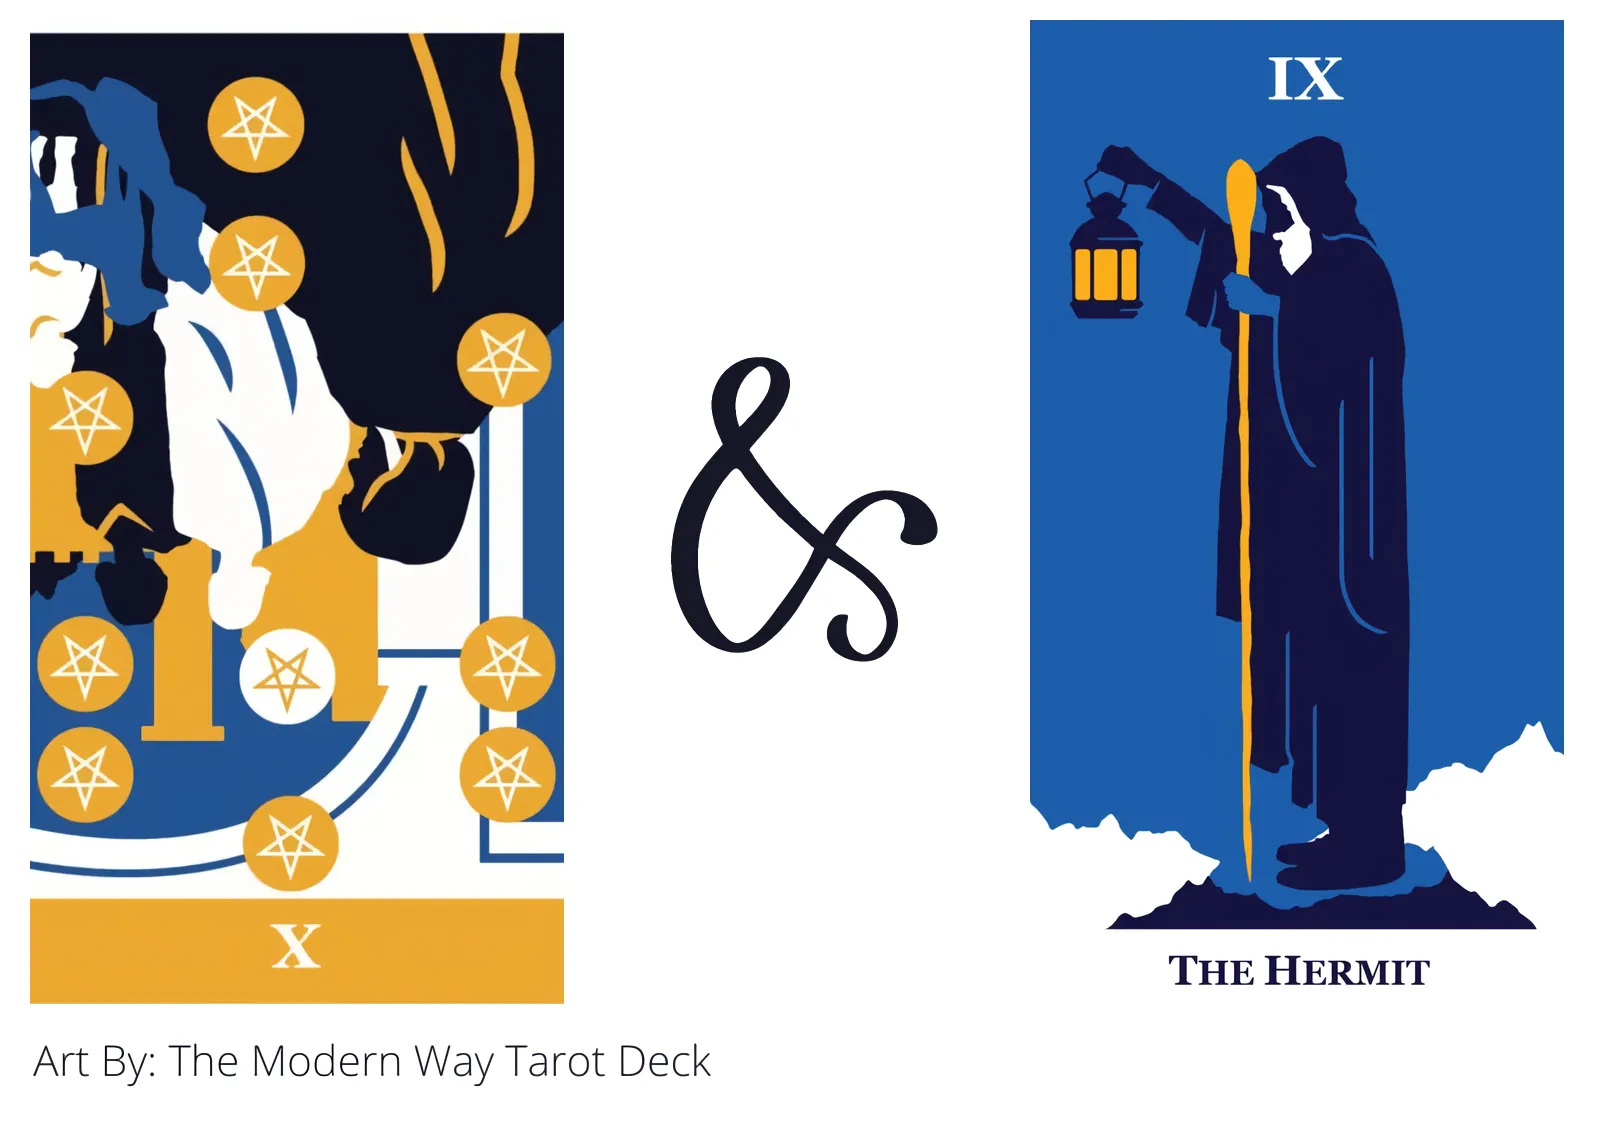 ten of pentacles reversed and the hermit tarot cards together